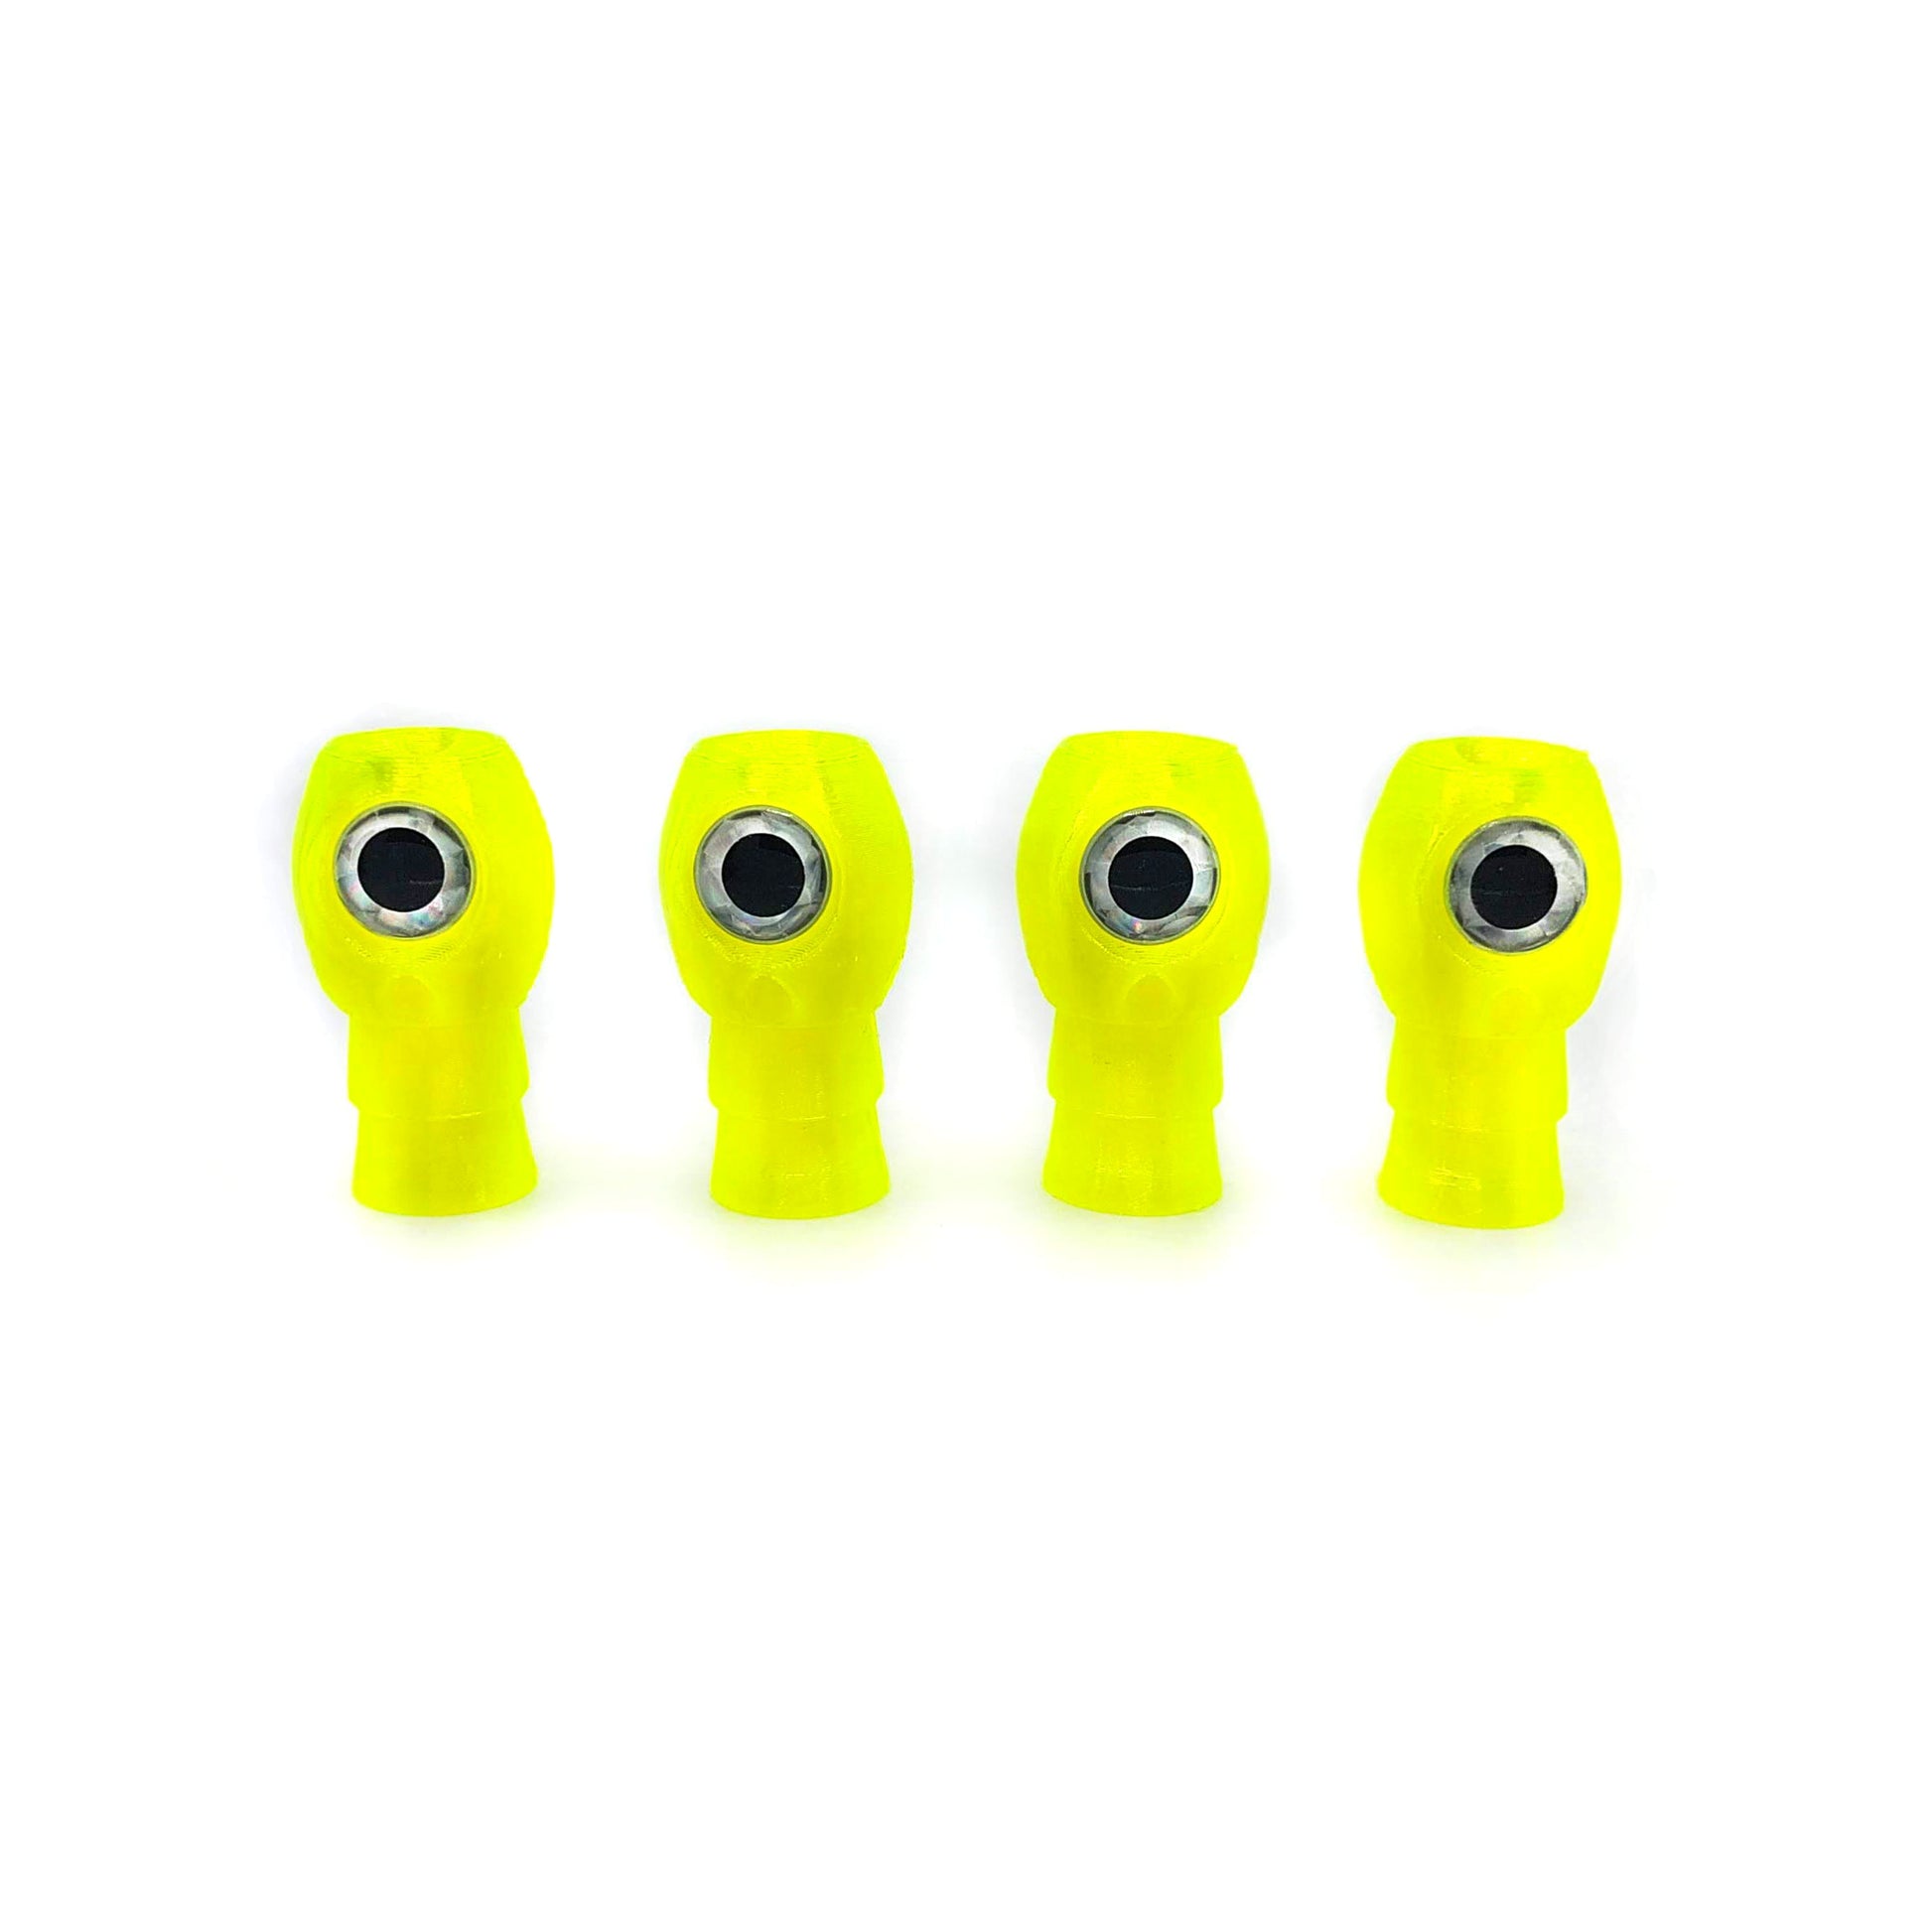 Cyclops 1.65" Offshore Trolling Heads (4 Pack) - Evolution Lures